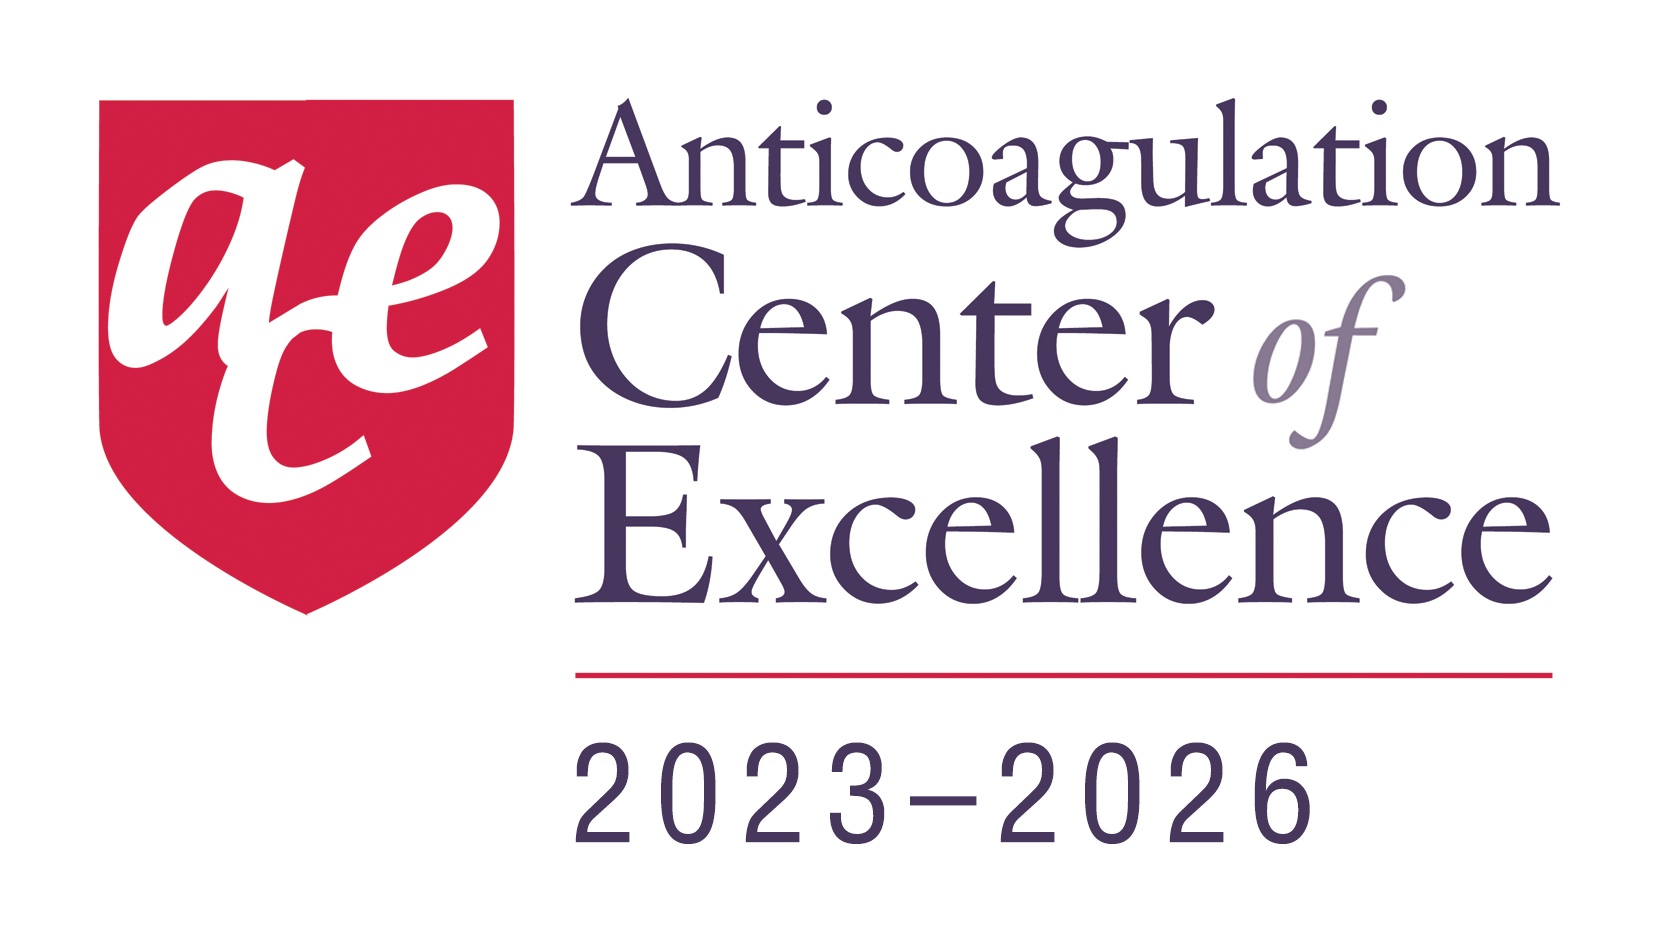 Anticoagulation Center of Excellence 2023-2026 logo showing white letters of ACE in a red block of color